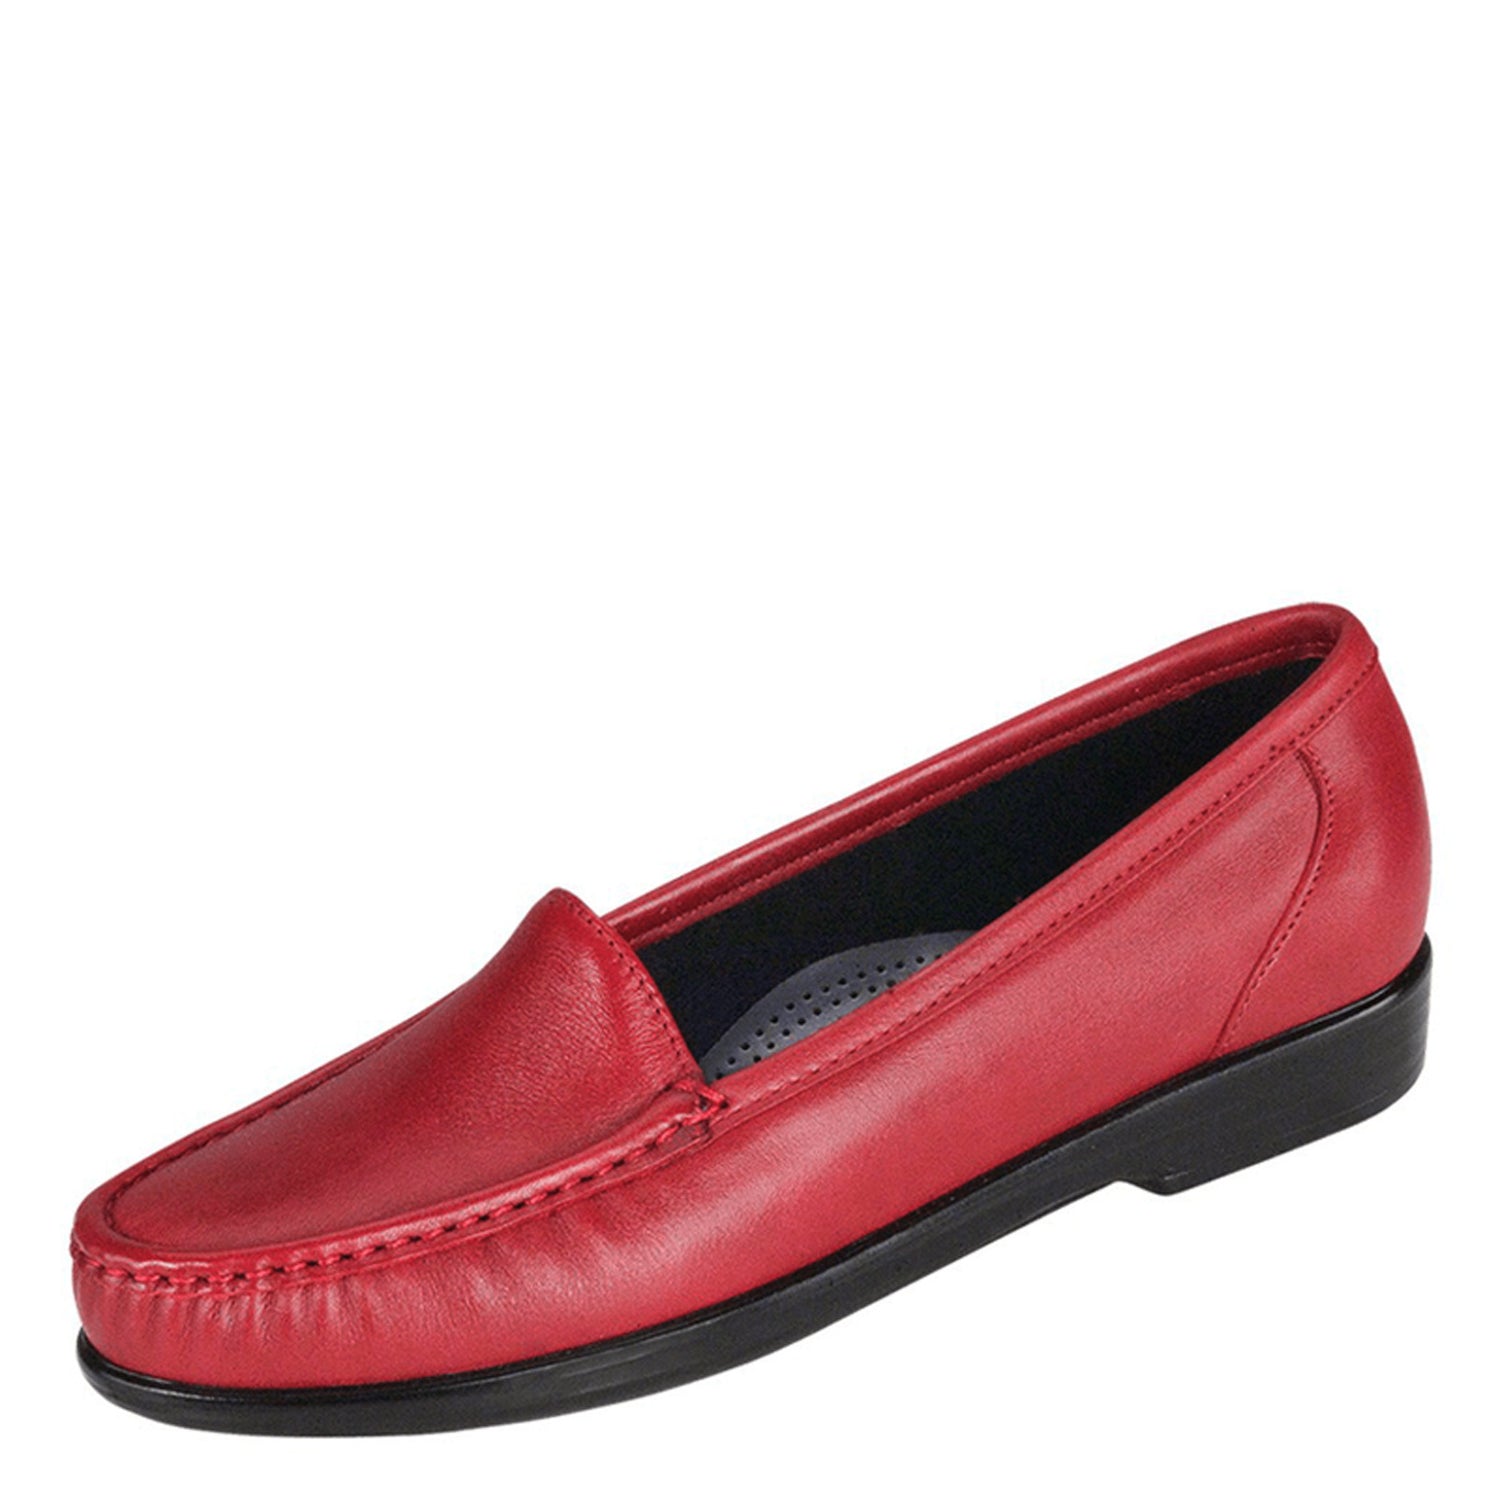 Peltz Shoes  Women's SAS Simplify Loafer RED SIMPLIFY RED